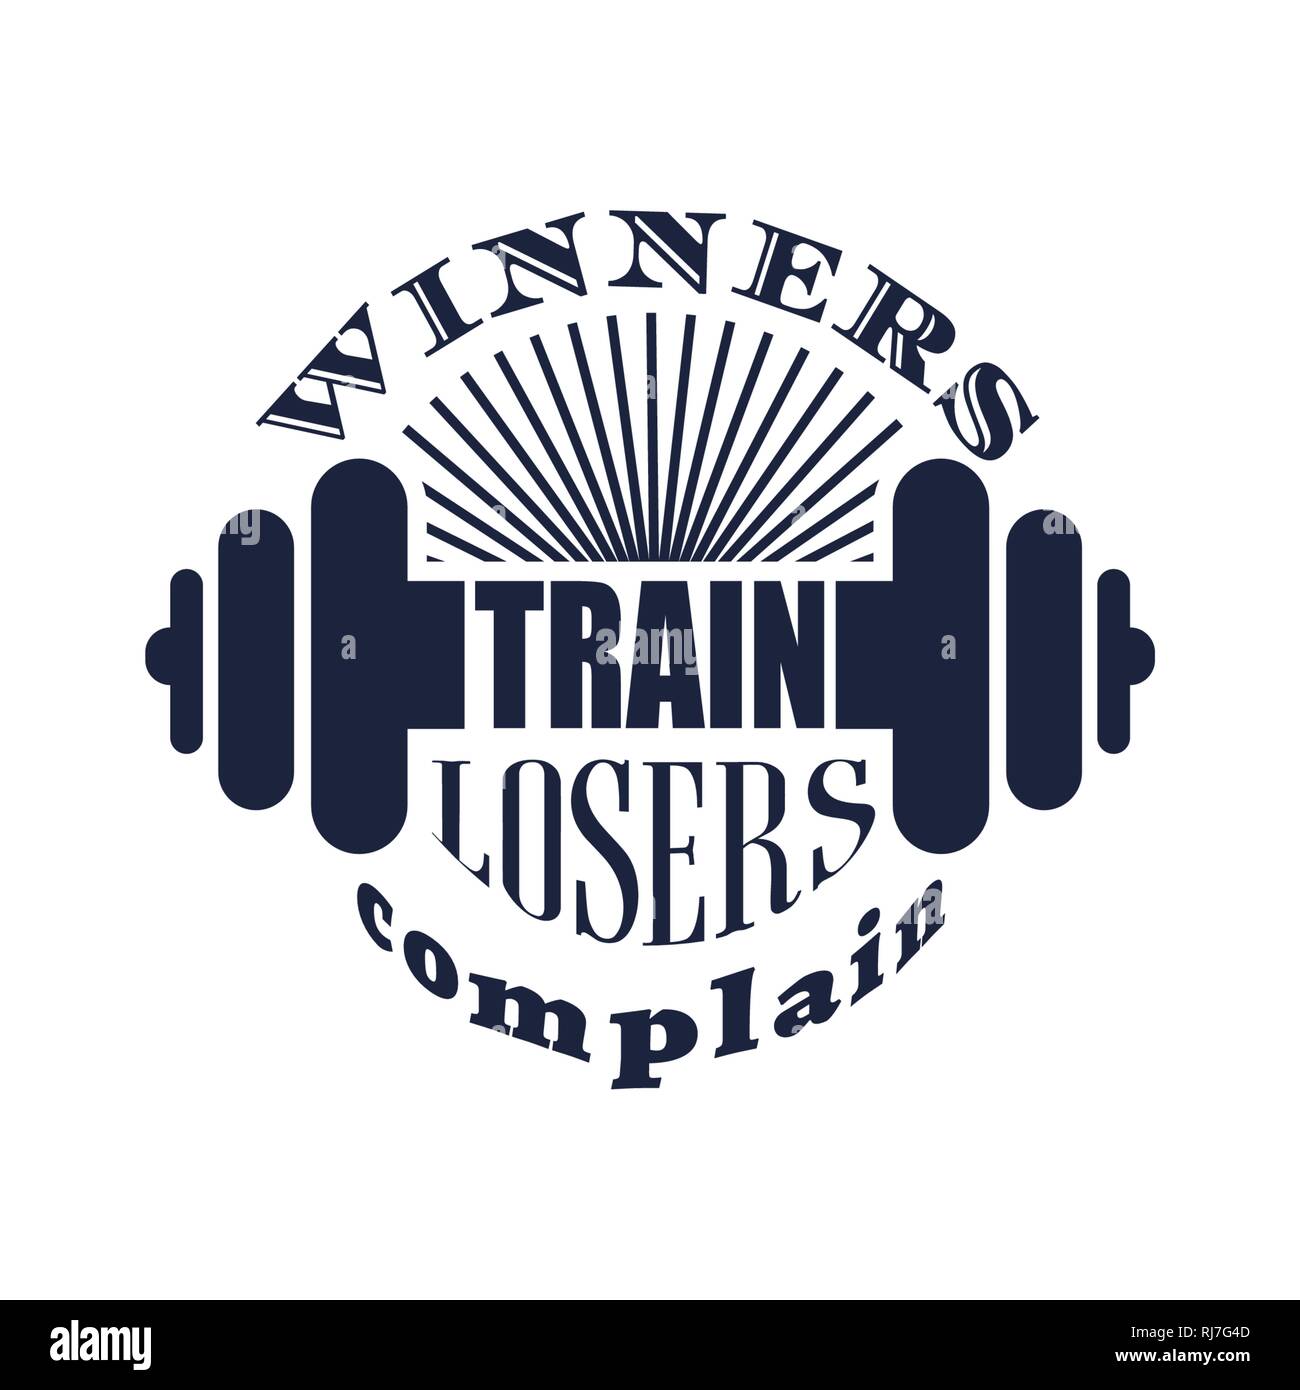 Winners train losers complain text Stock Vector